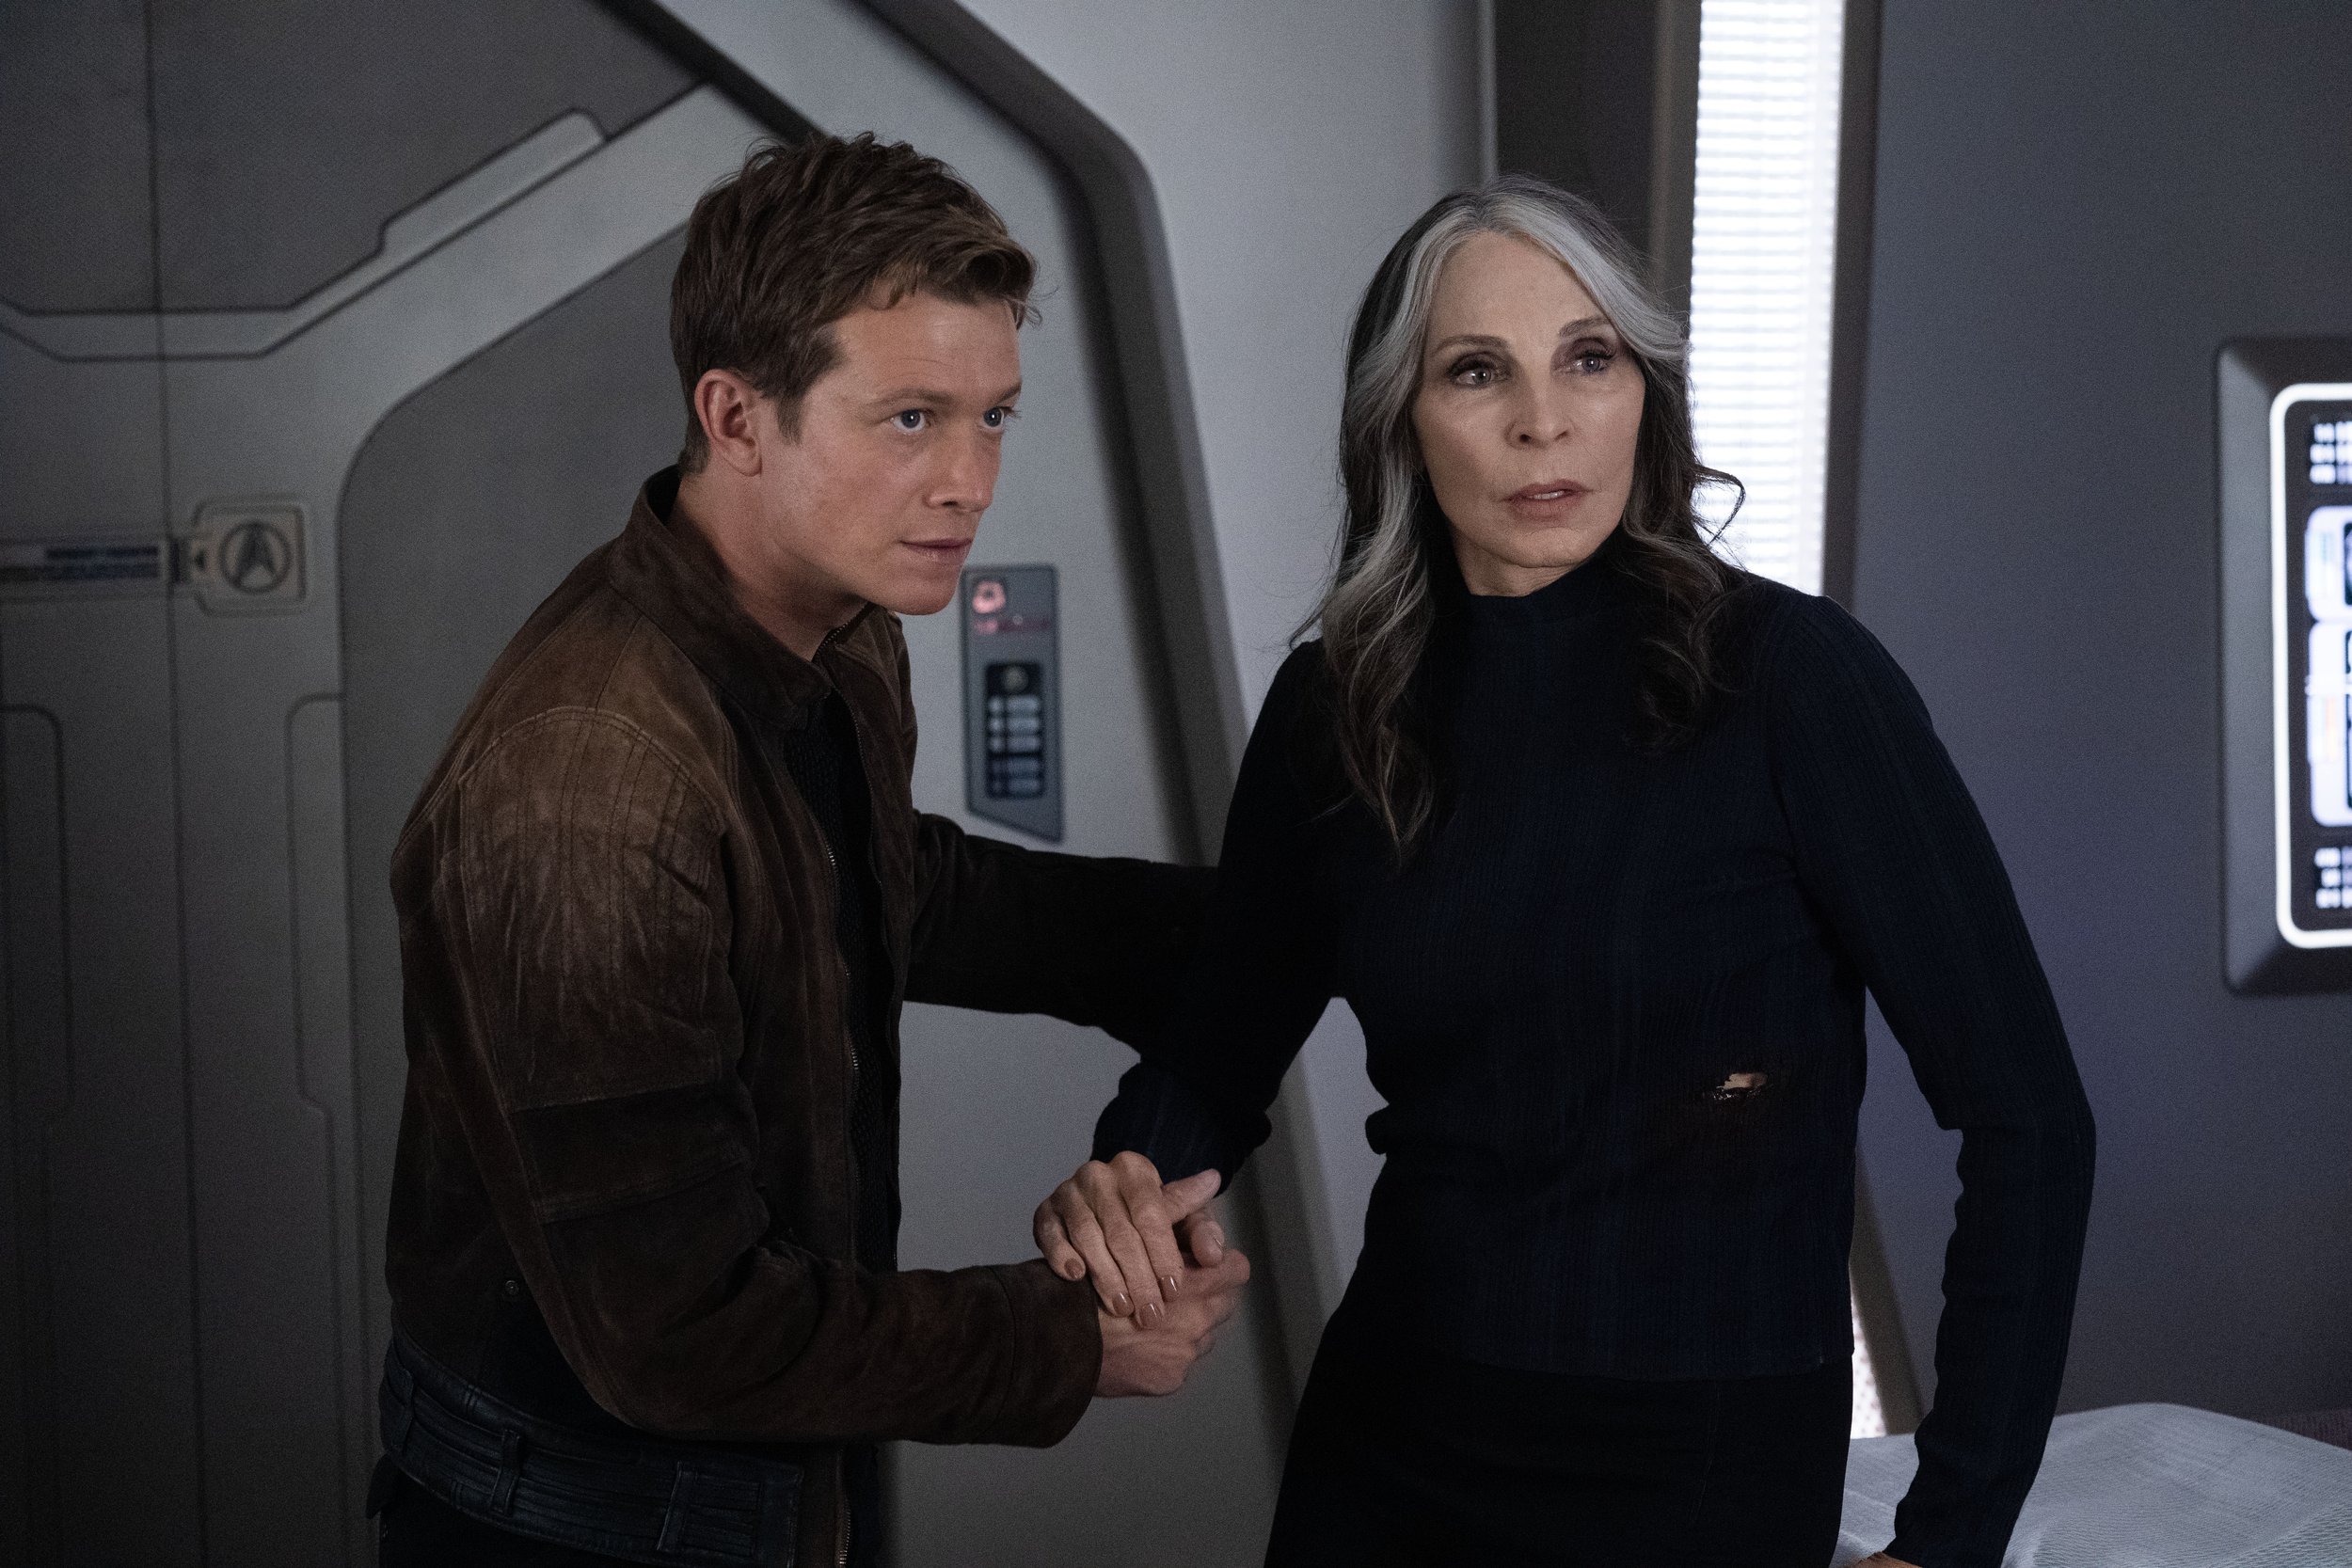   Ed Speleers  as Jack Crusher and  Gates McFadden  as Dr. Beverly Crusher.  Photo Credit: Monty Brinton/Paramount+.  